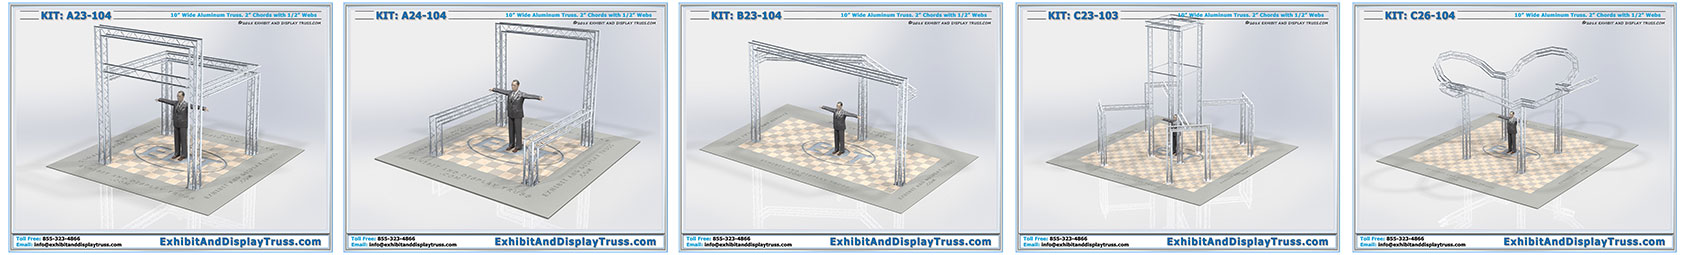 Collection of displays by edt exhibit and display truss and lds light design systems.